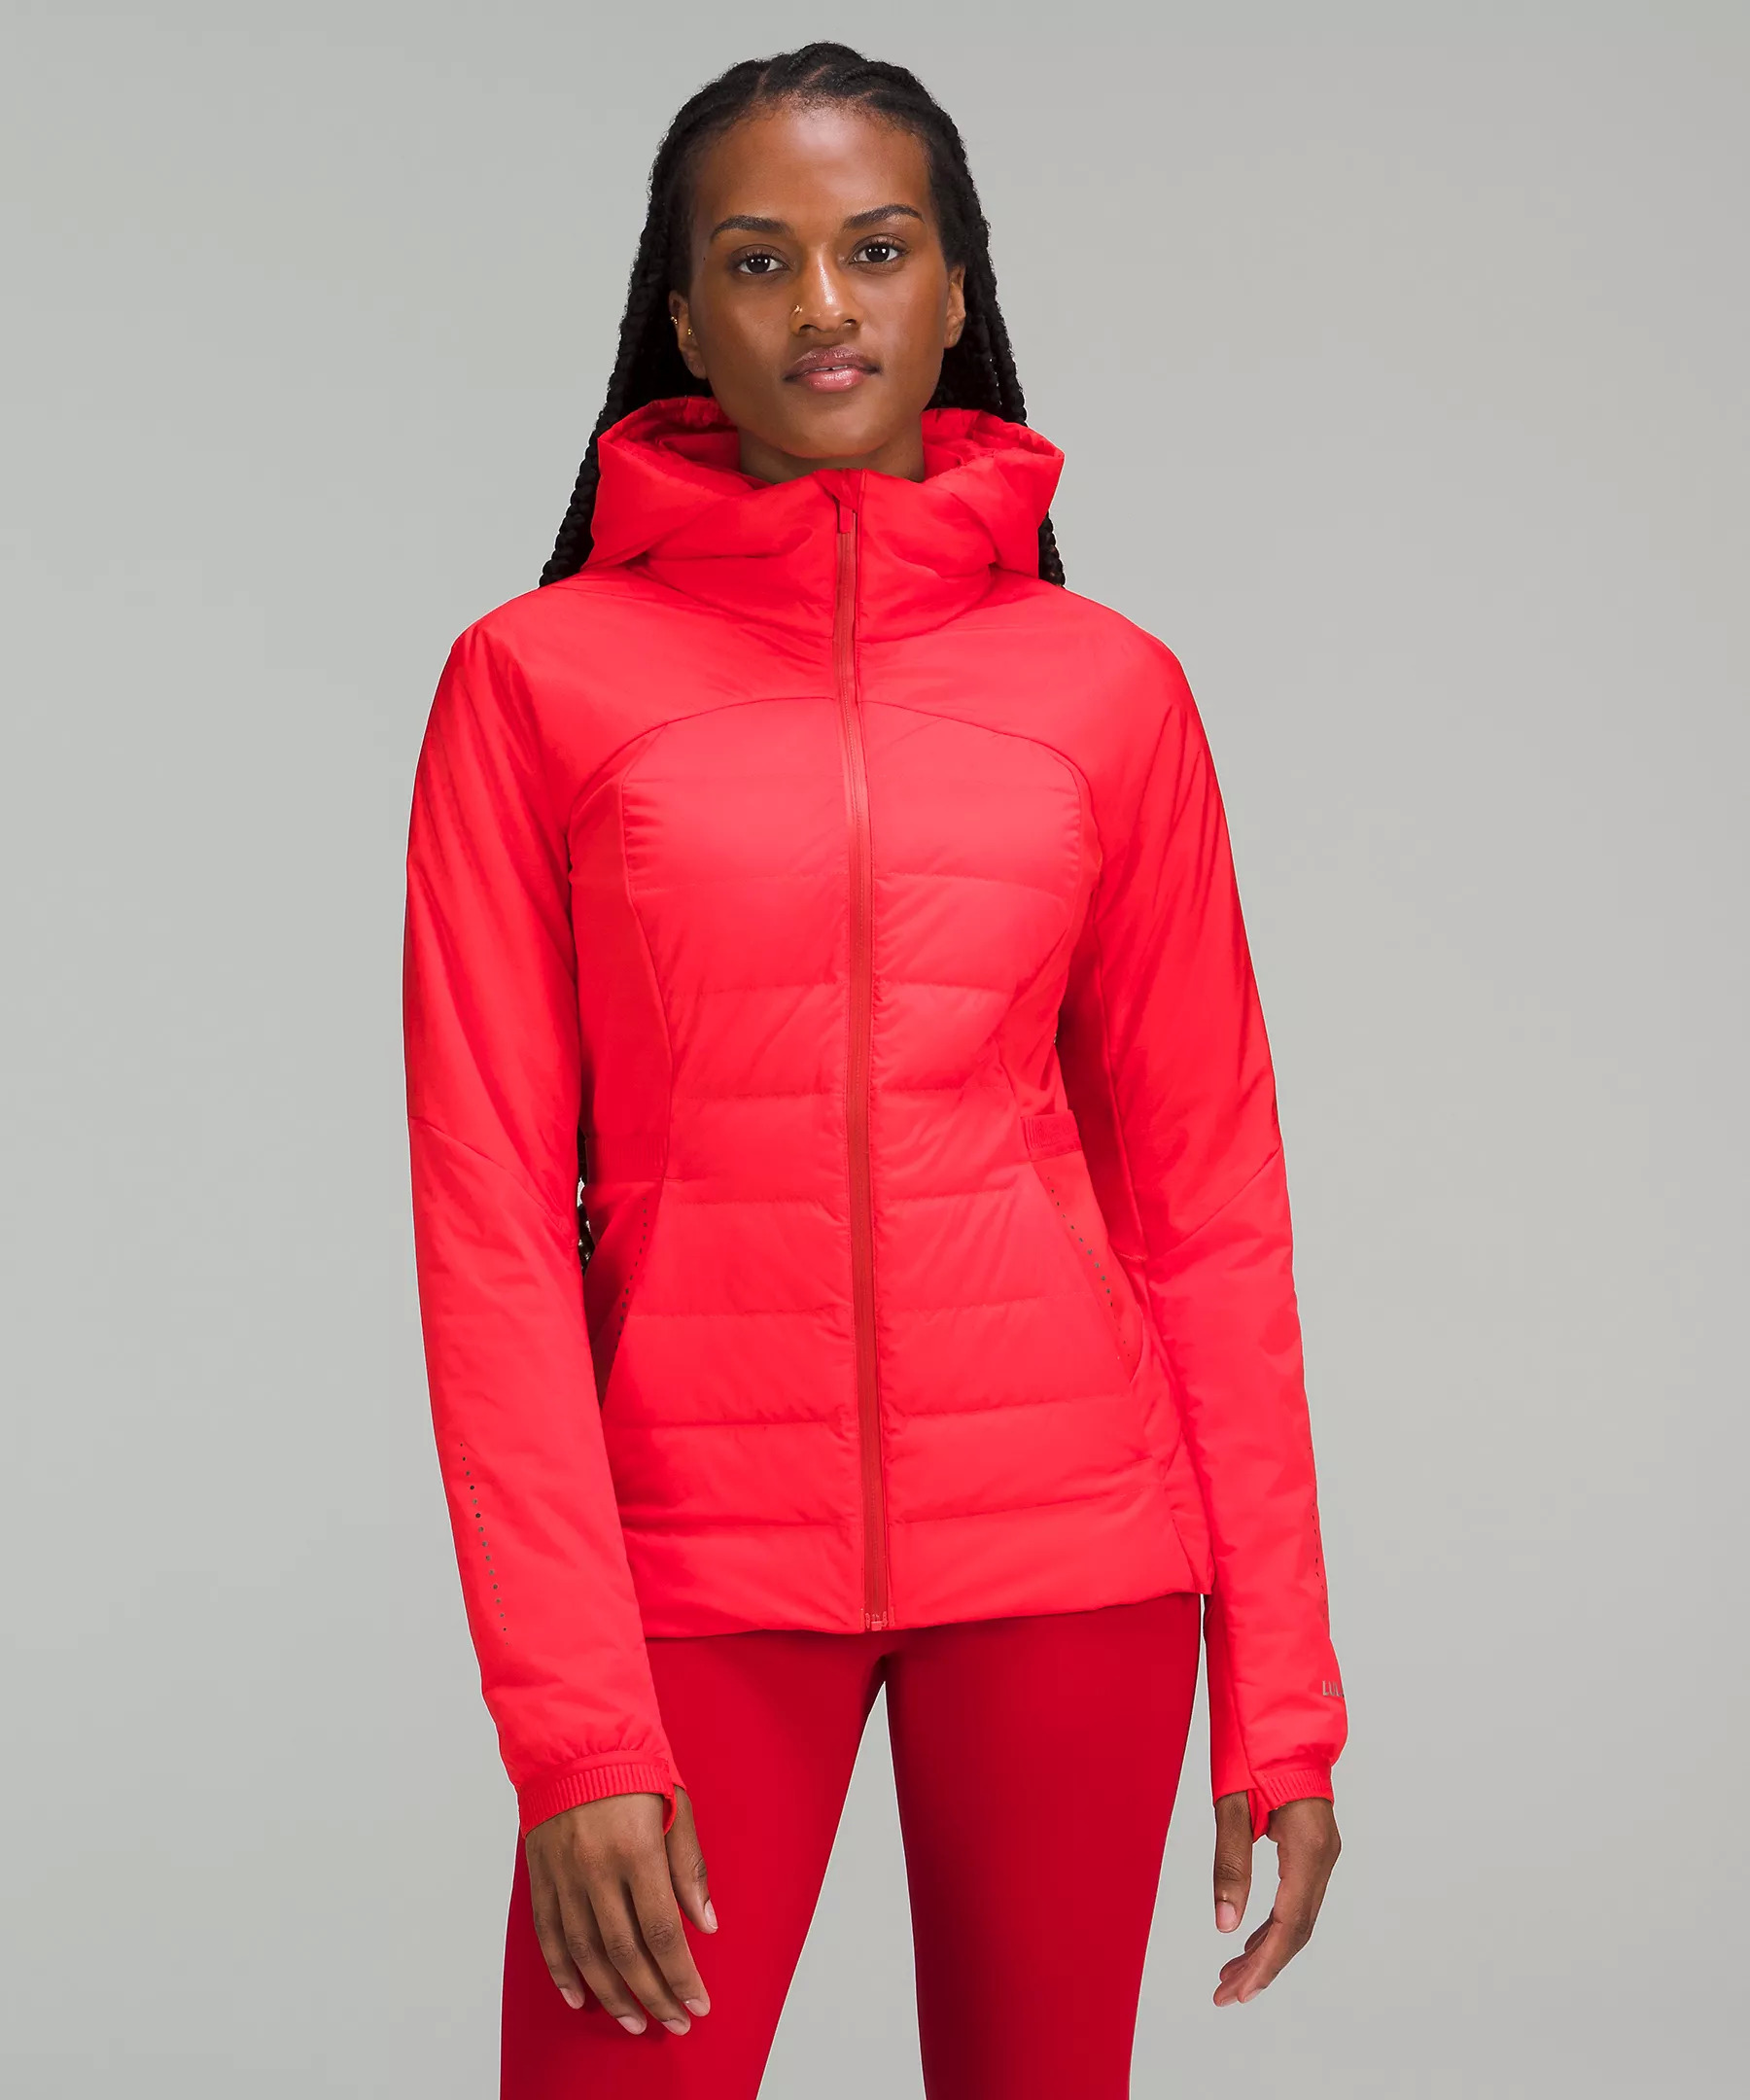 lululemon Women's Down for It All Running Jacket (Carnation Red, Size 0-8) $99 + Free Shipping